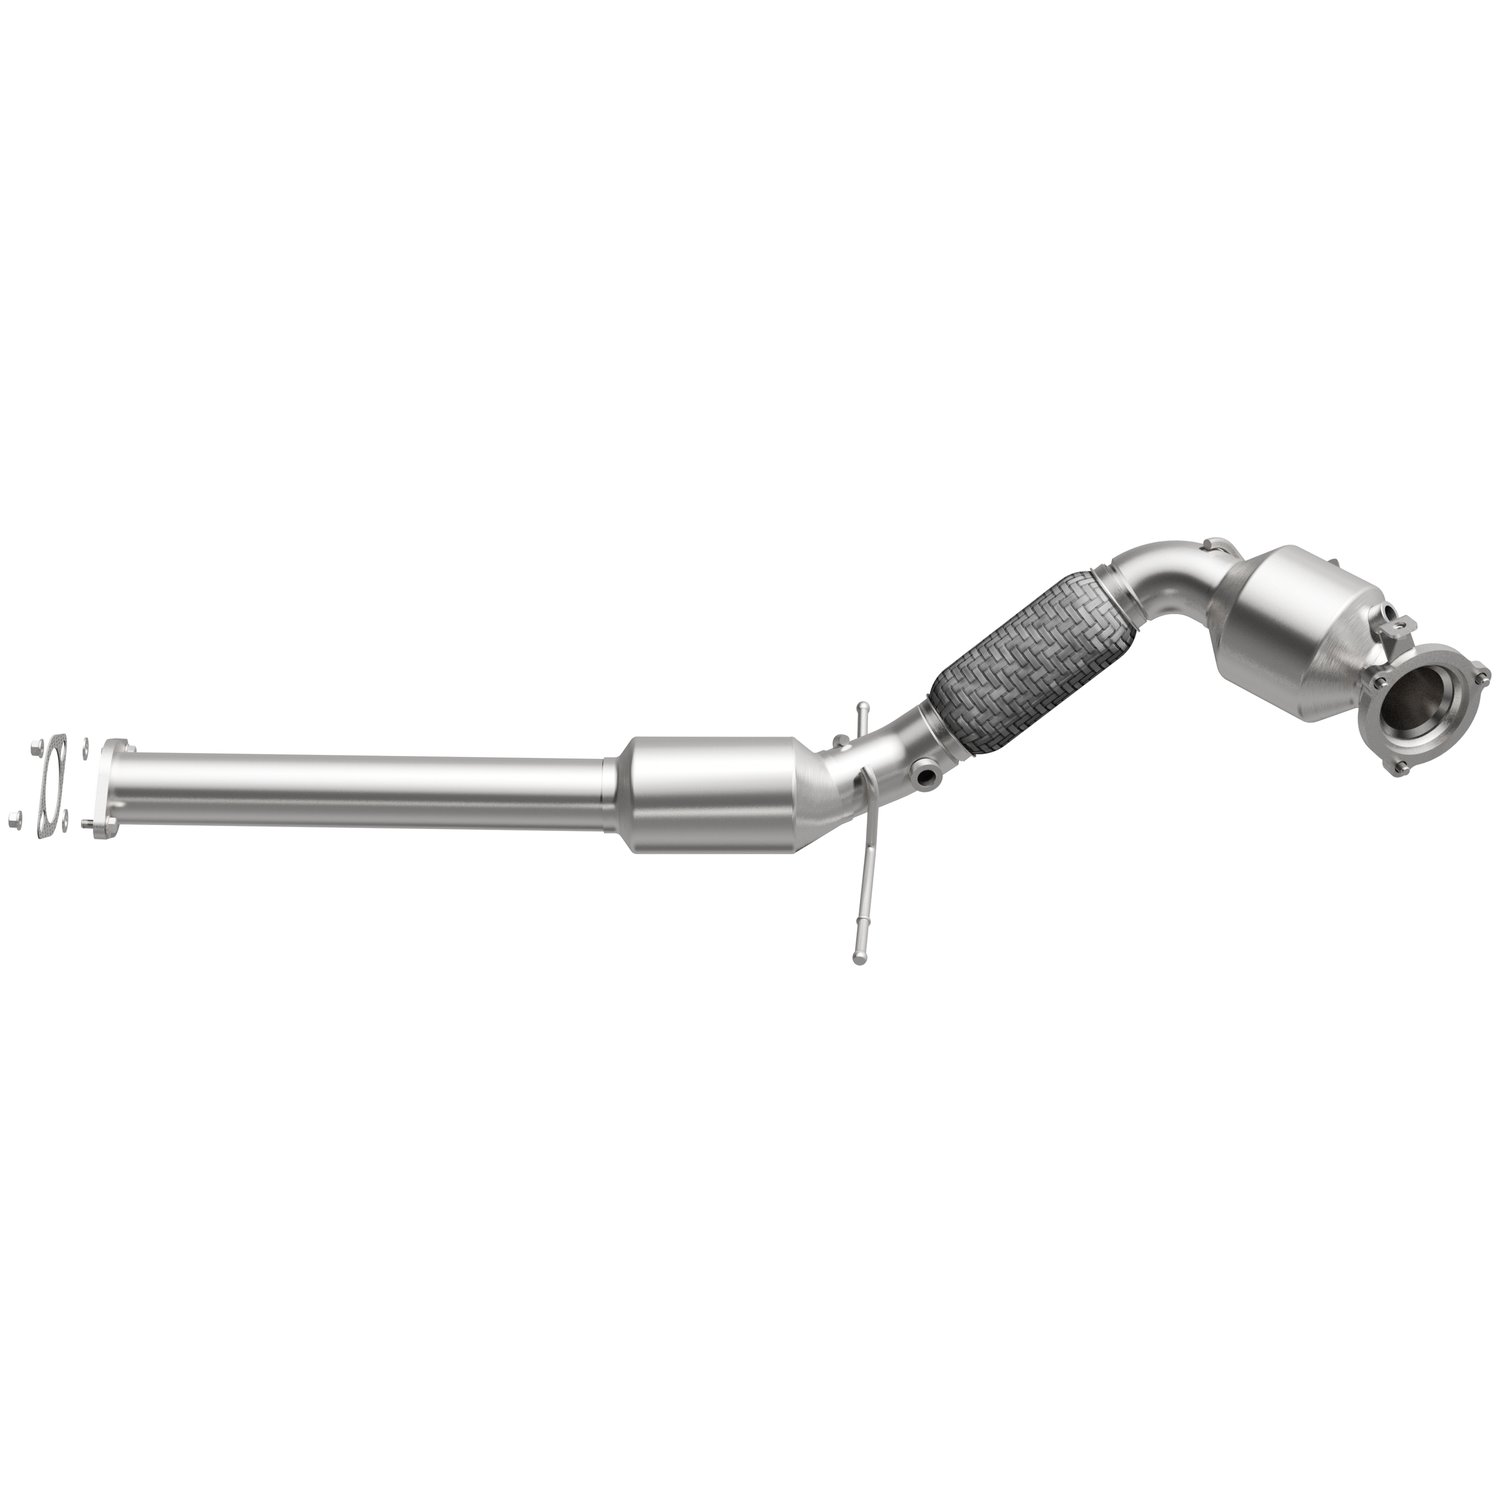 OEM Grade Federal / EPA Compliant Direct-Fit Catalytic Converter 21-685